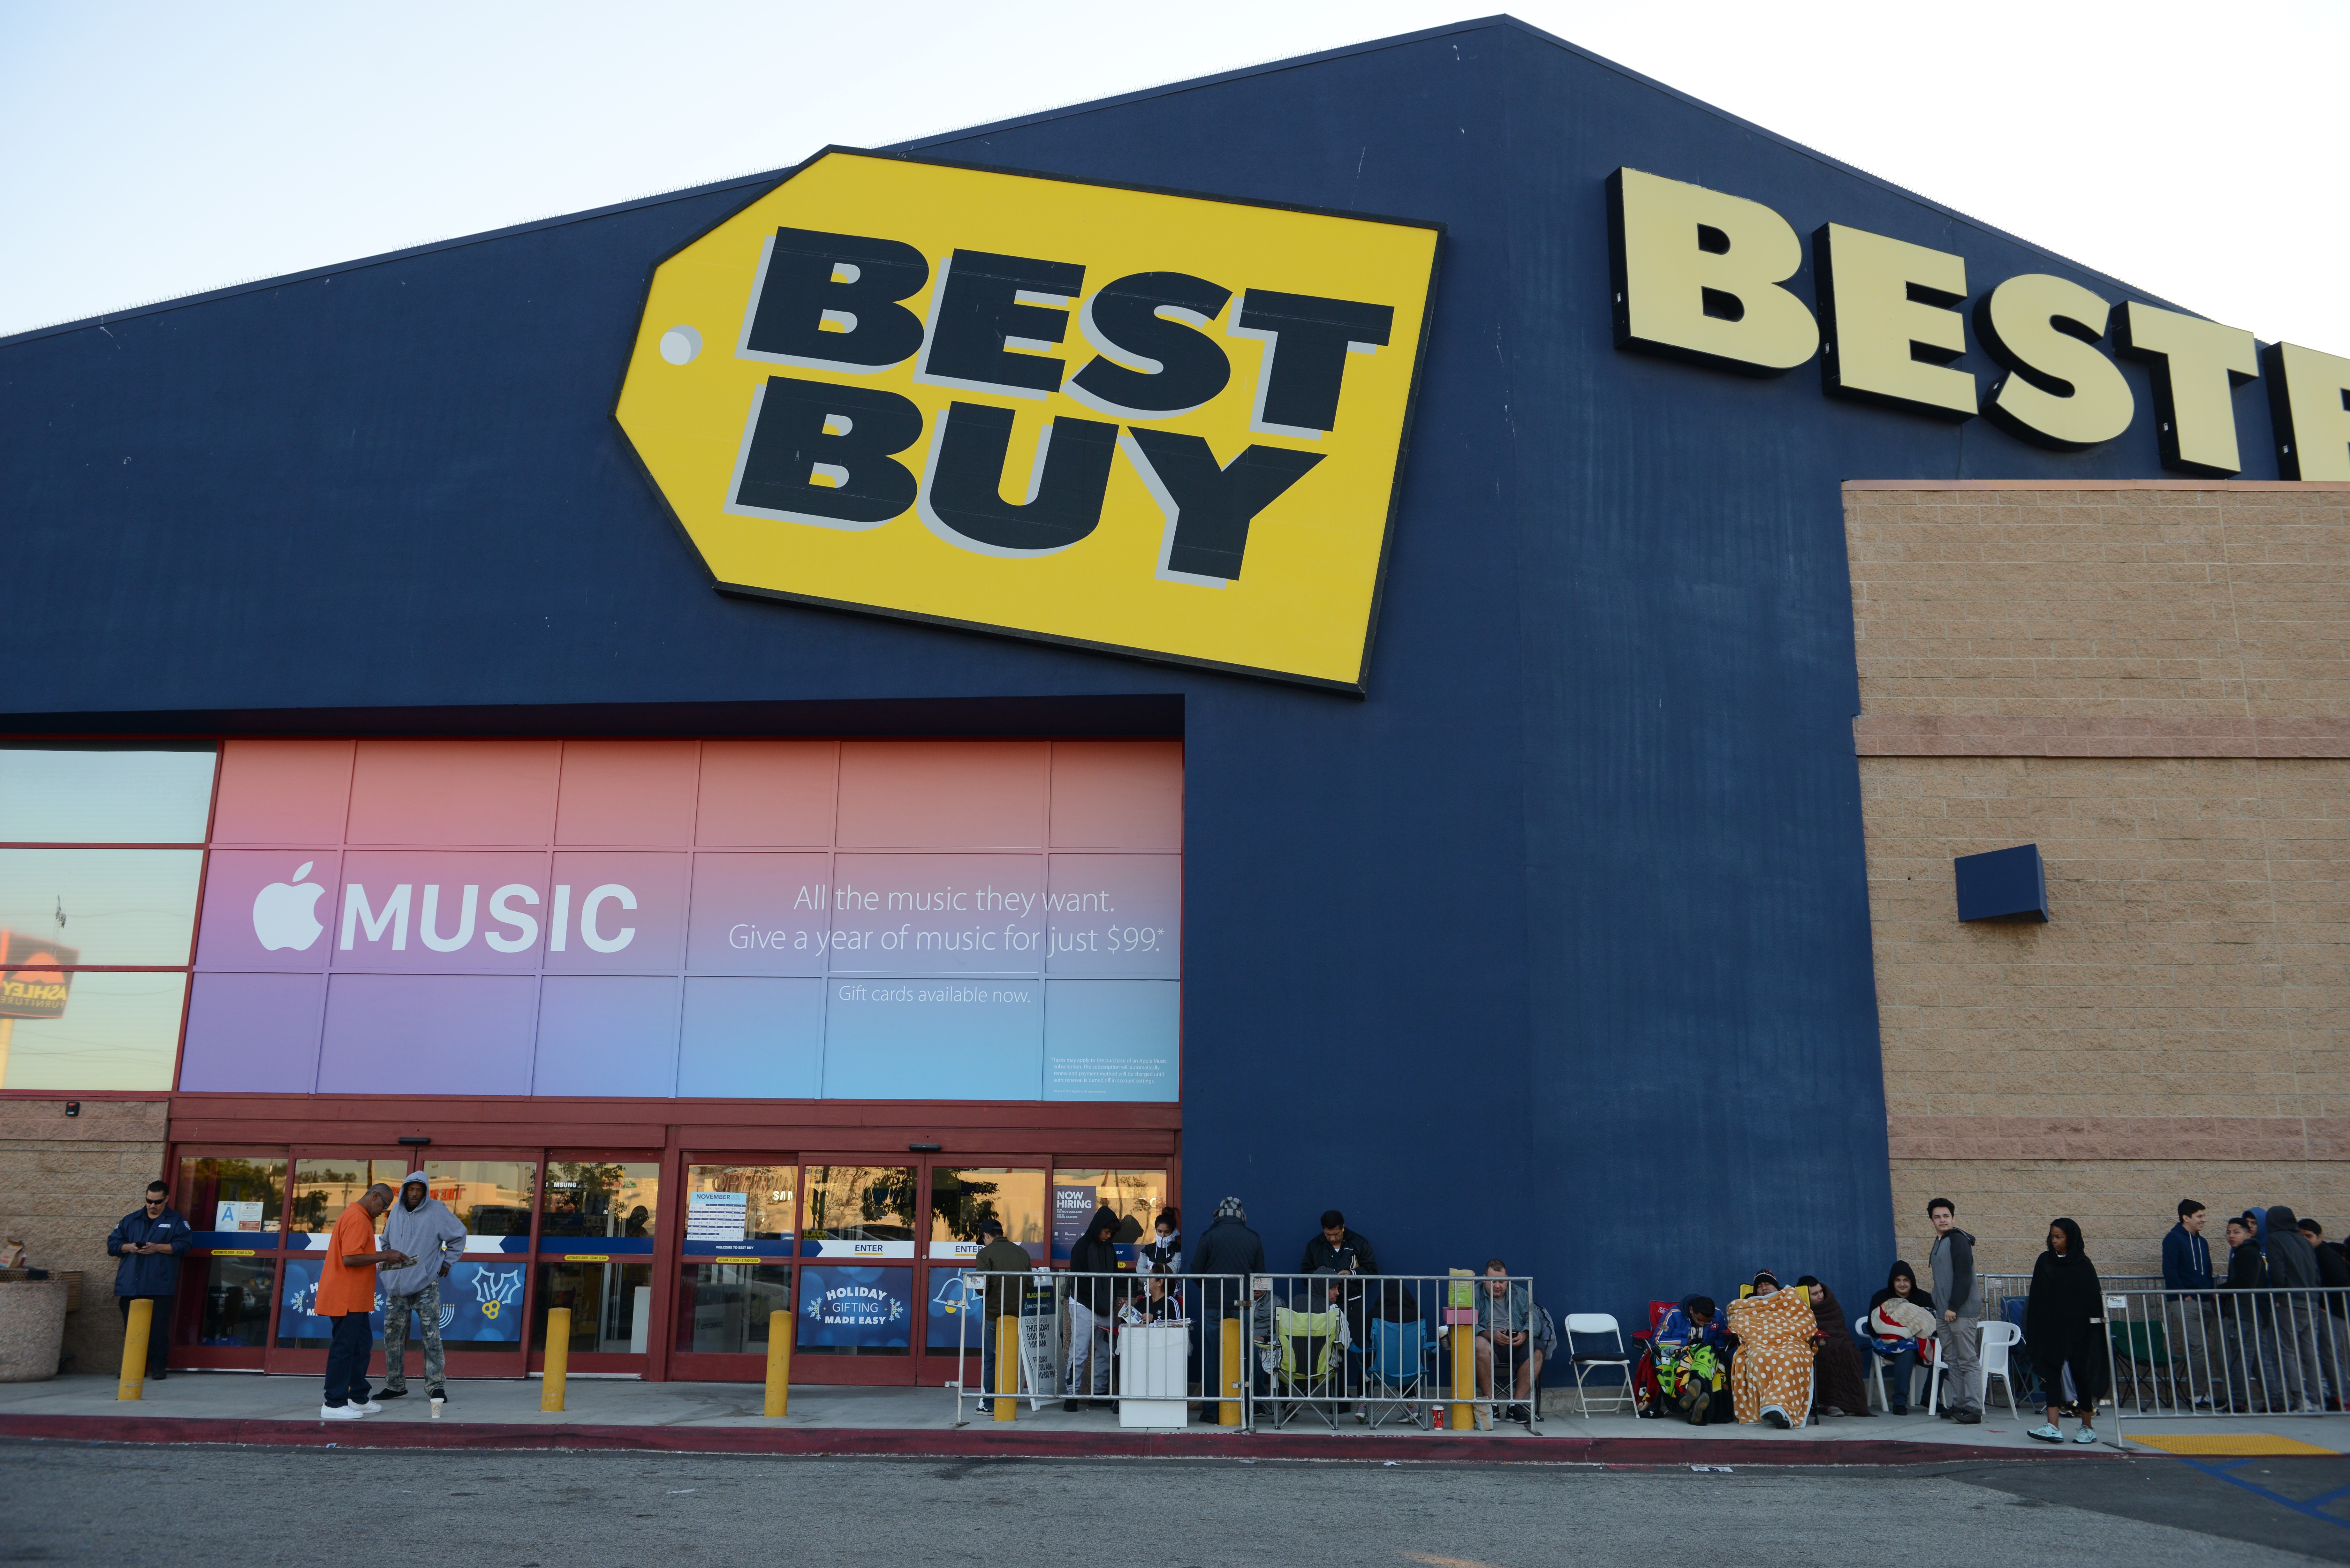 What is Best Buy’s return policy?